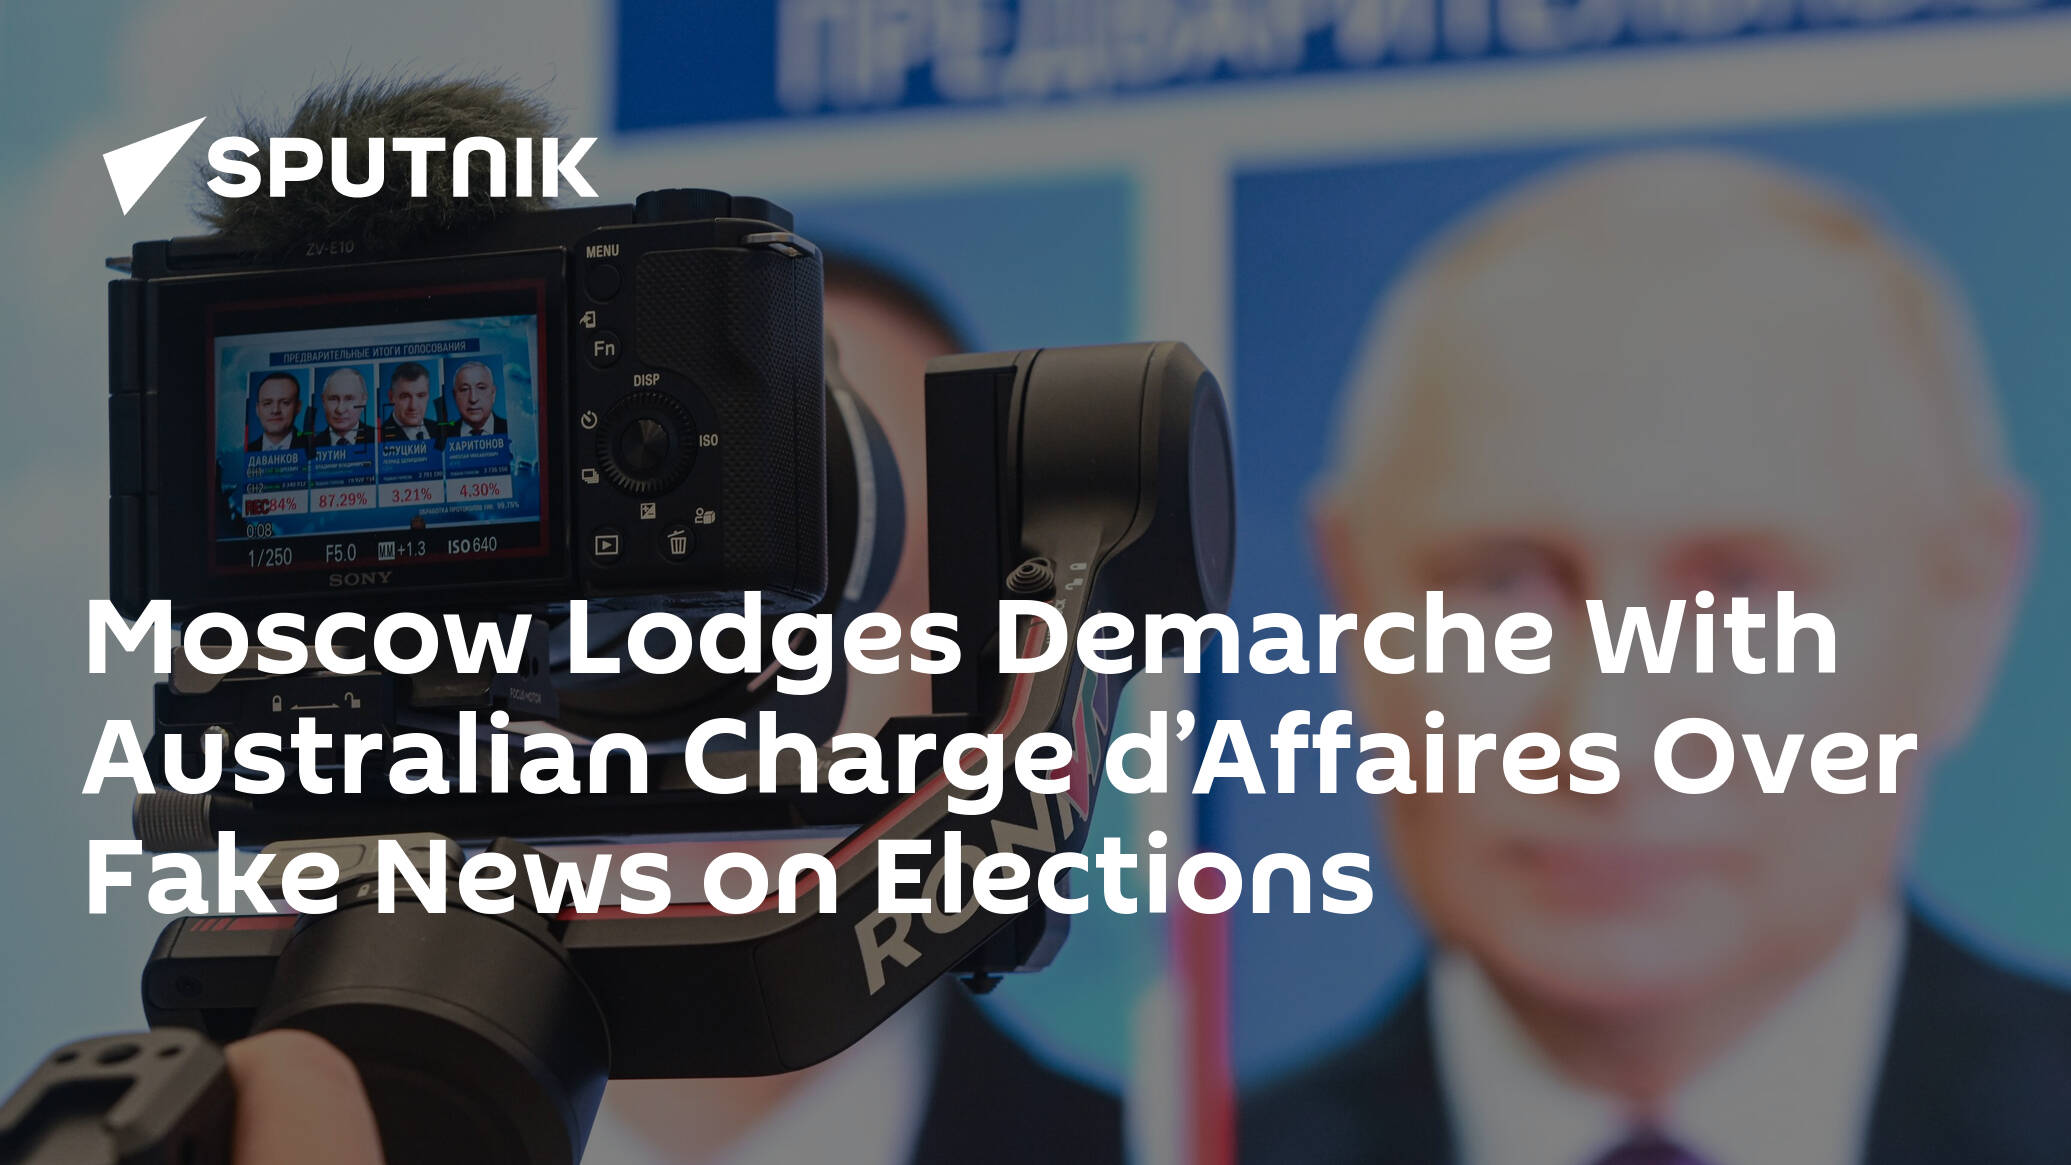 Moscow Says Lodges Demarche With Australian Charge d’Affaires Over Fake News on Elections